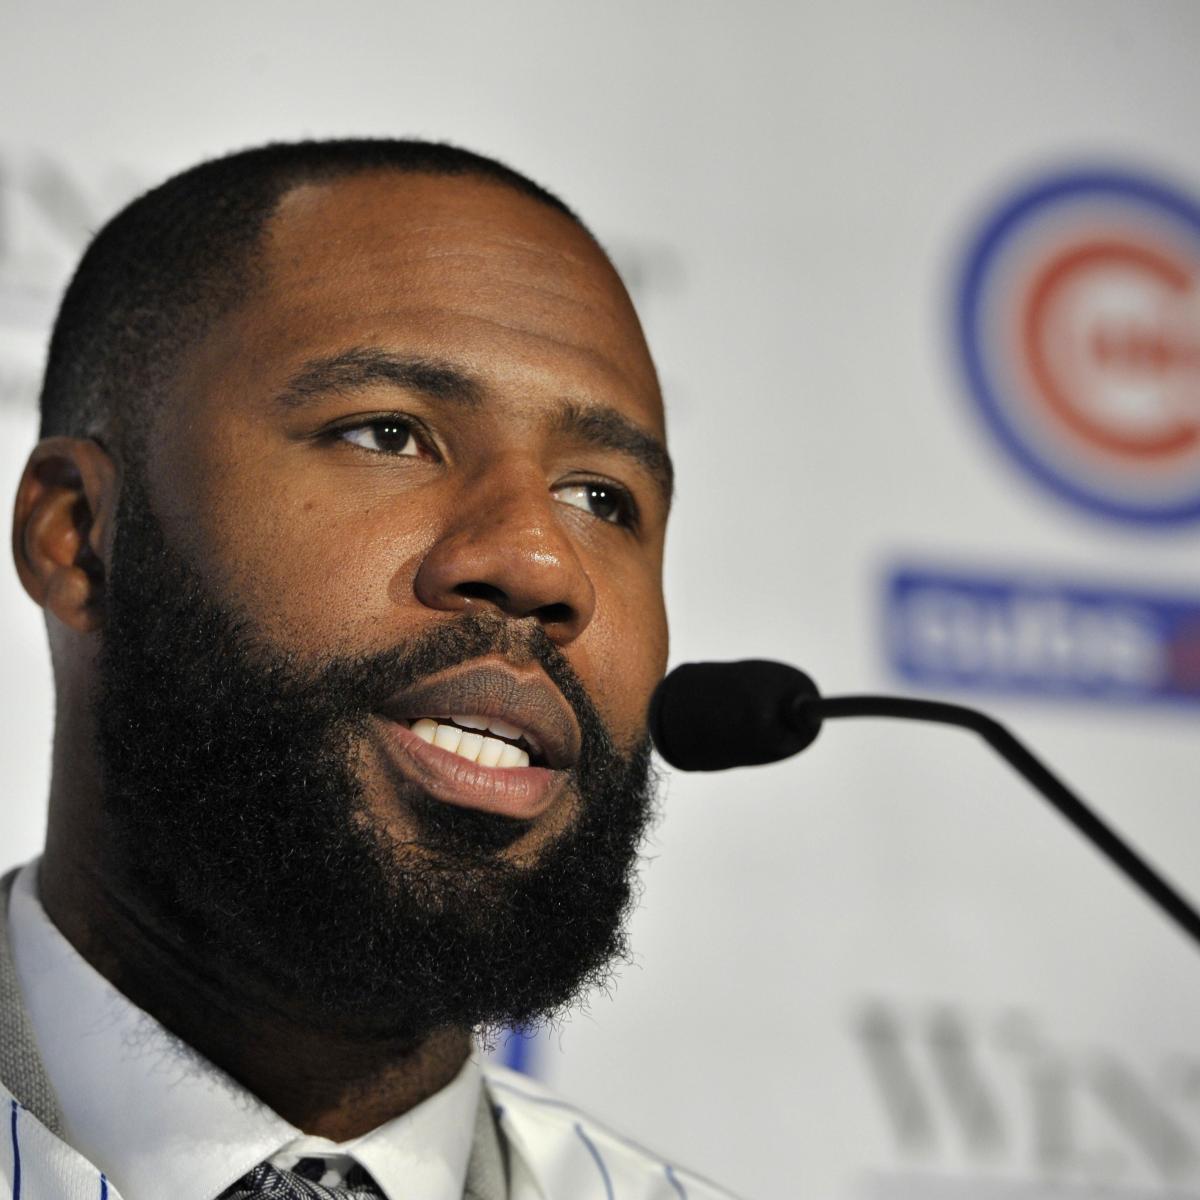 Jason Heyward's authentic self-expression shines a light on his